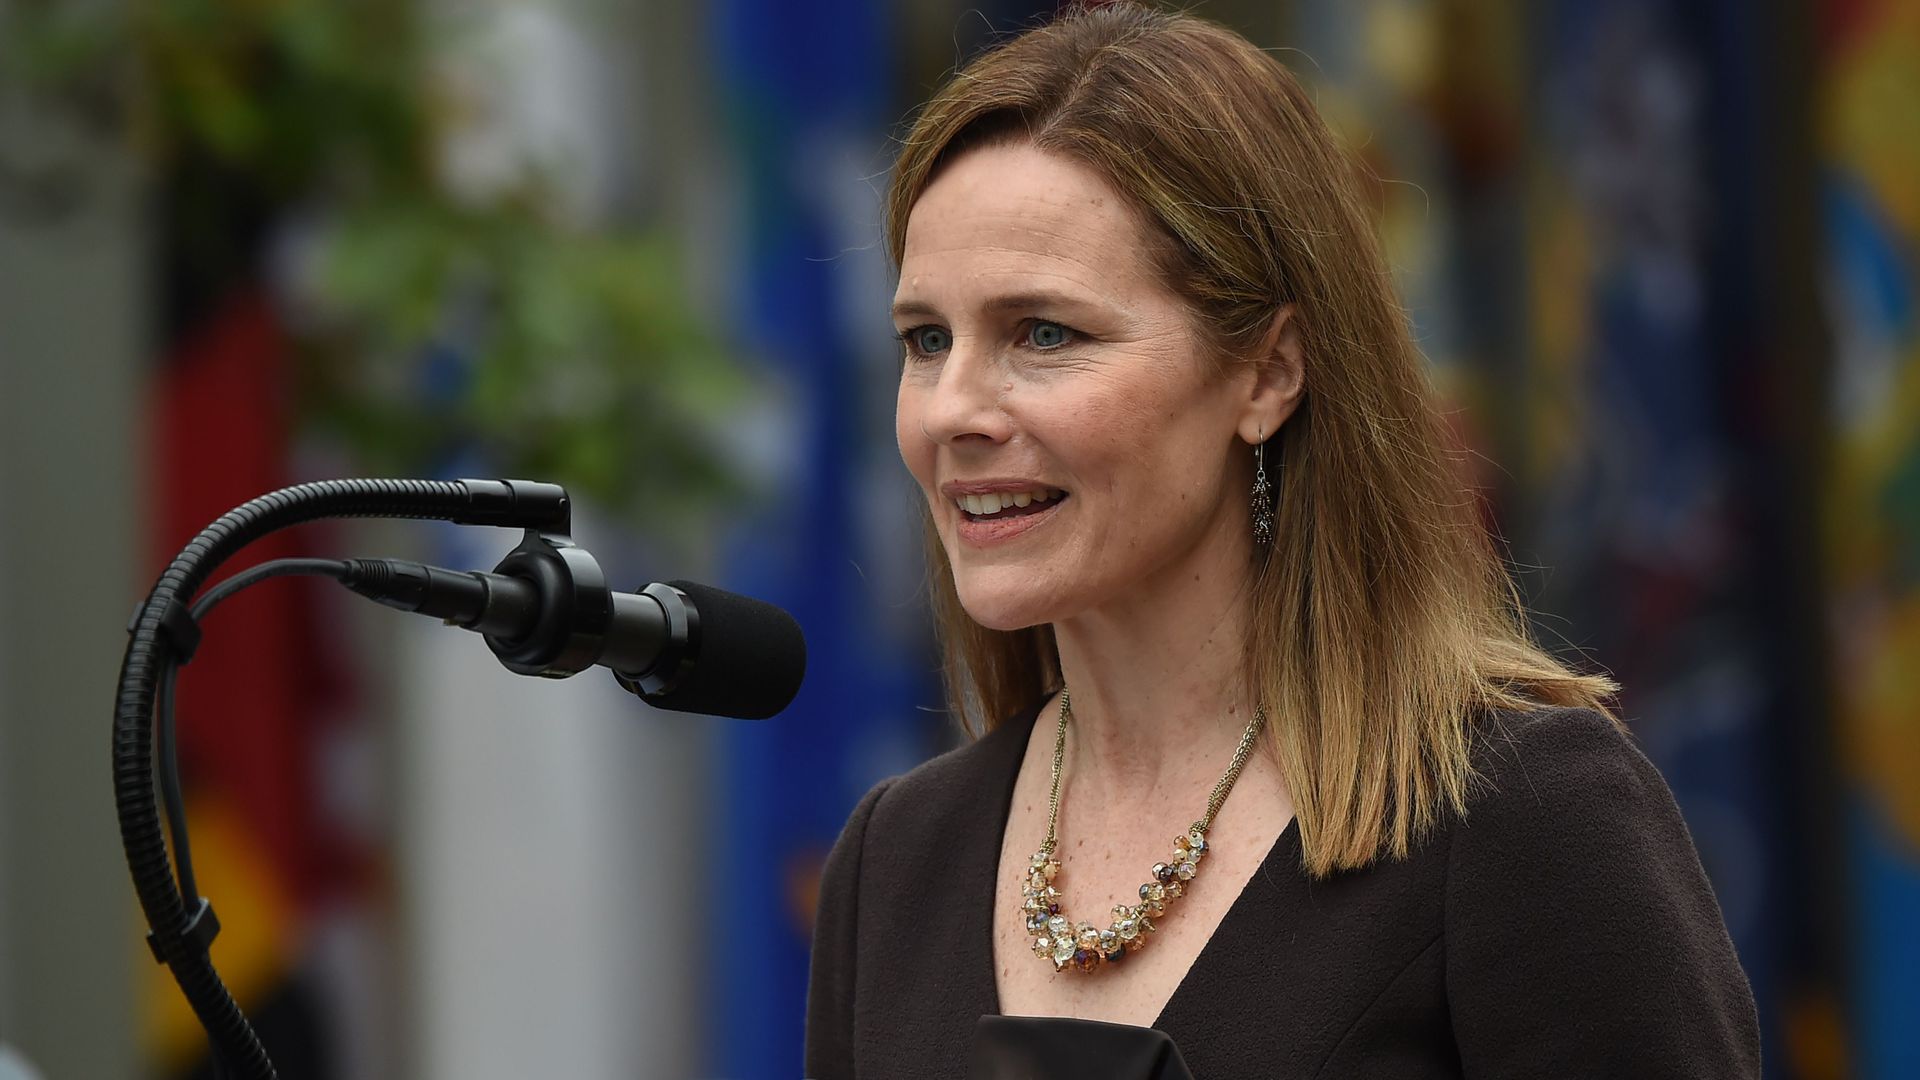 Trump introduces Amy Coney Barrett as nominee to replace Ruth Bader Ginsburg